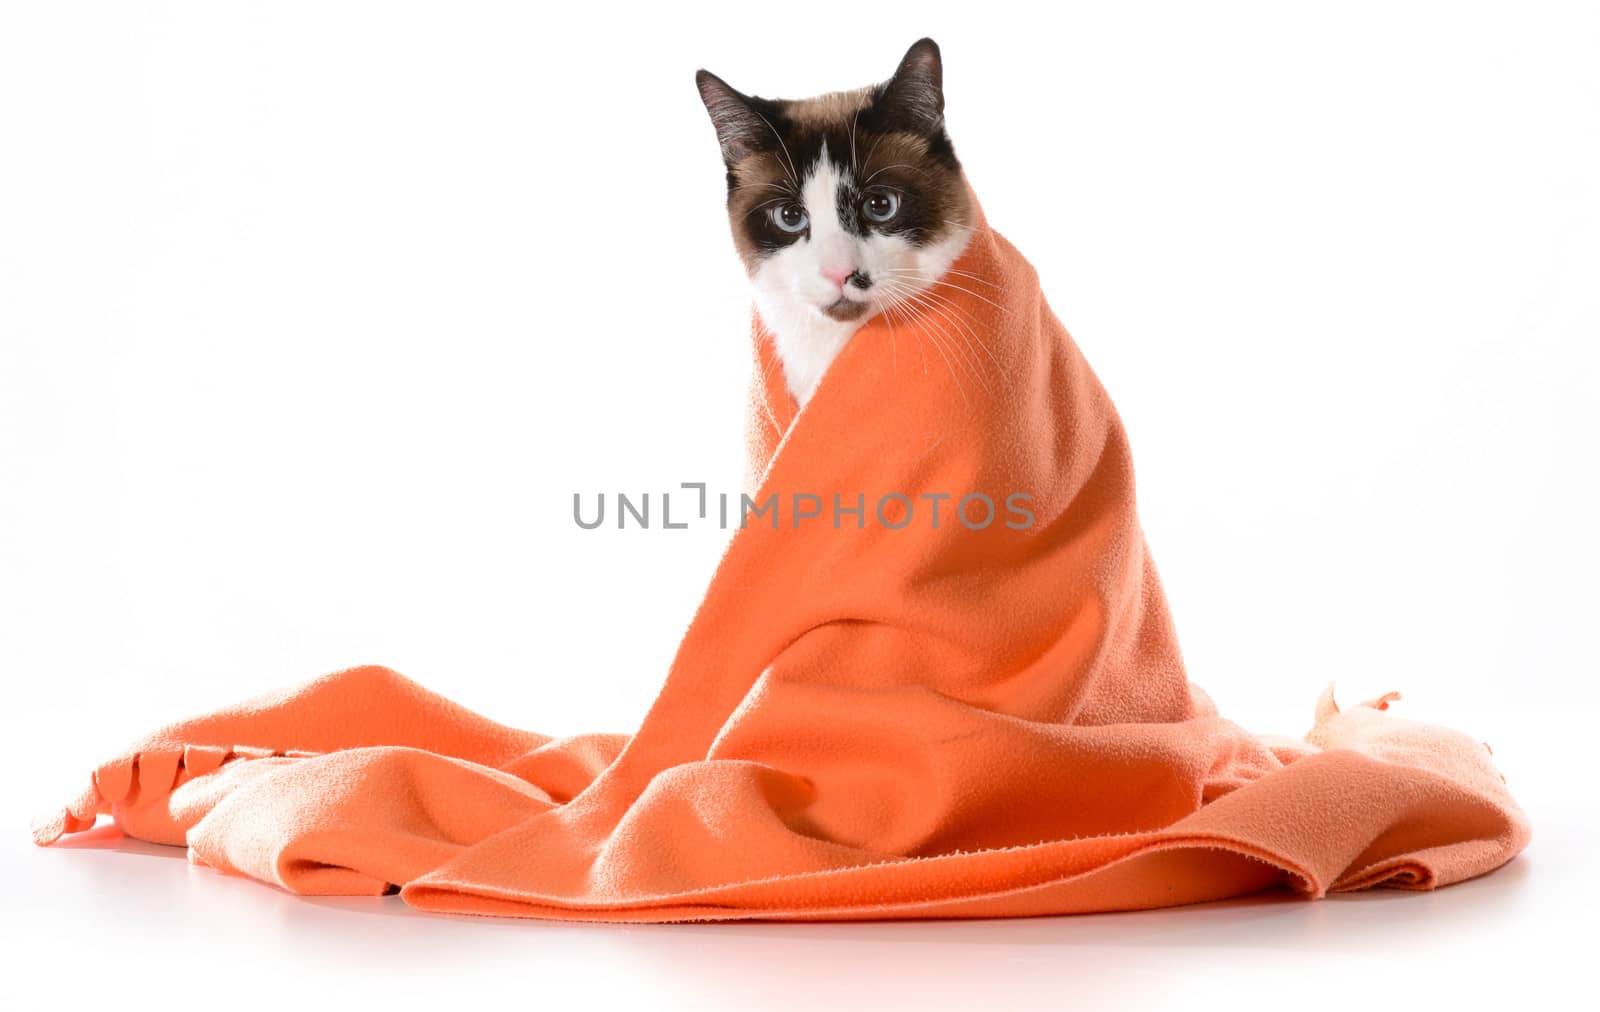 cat under cover by willeecole123